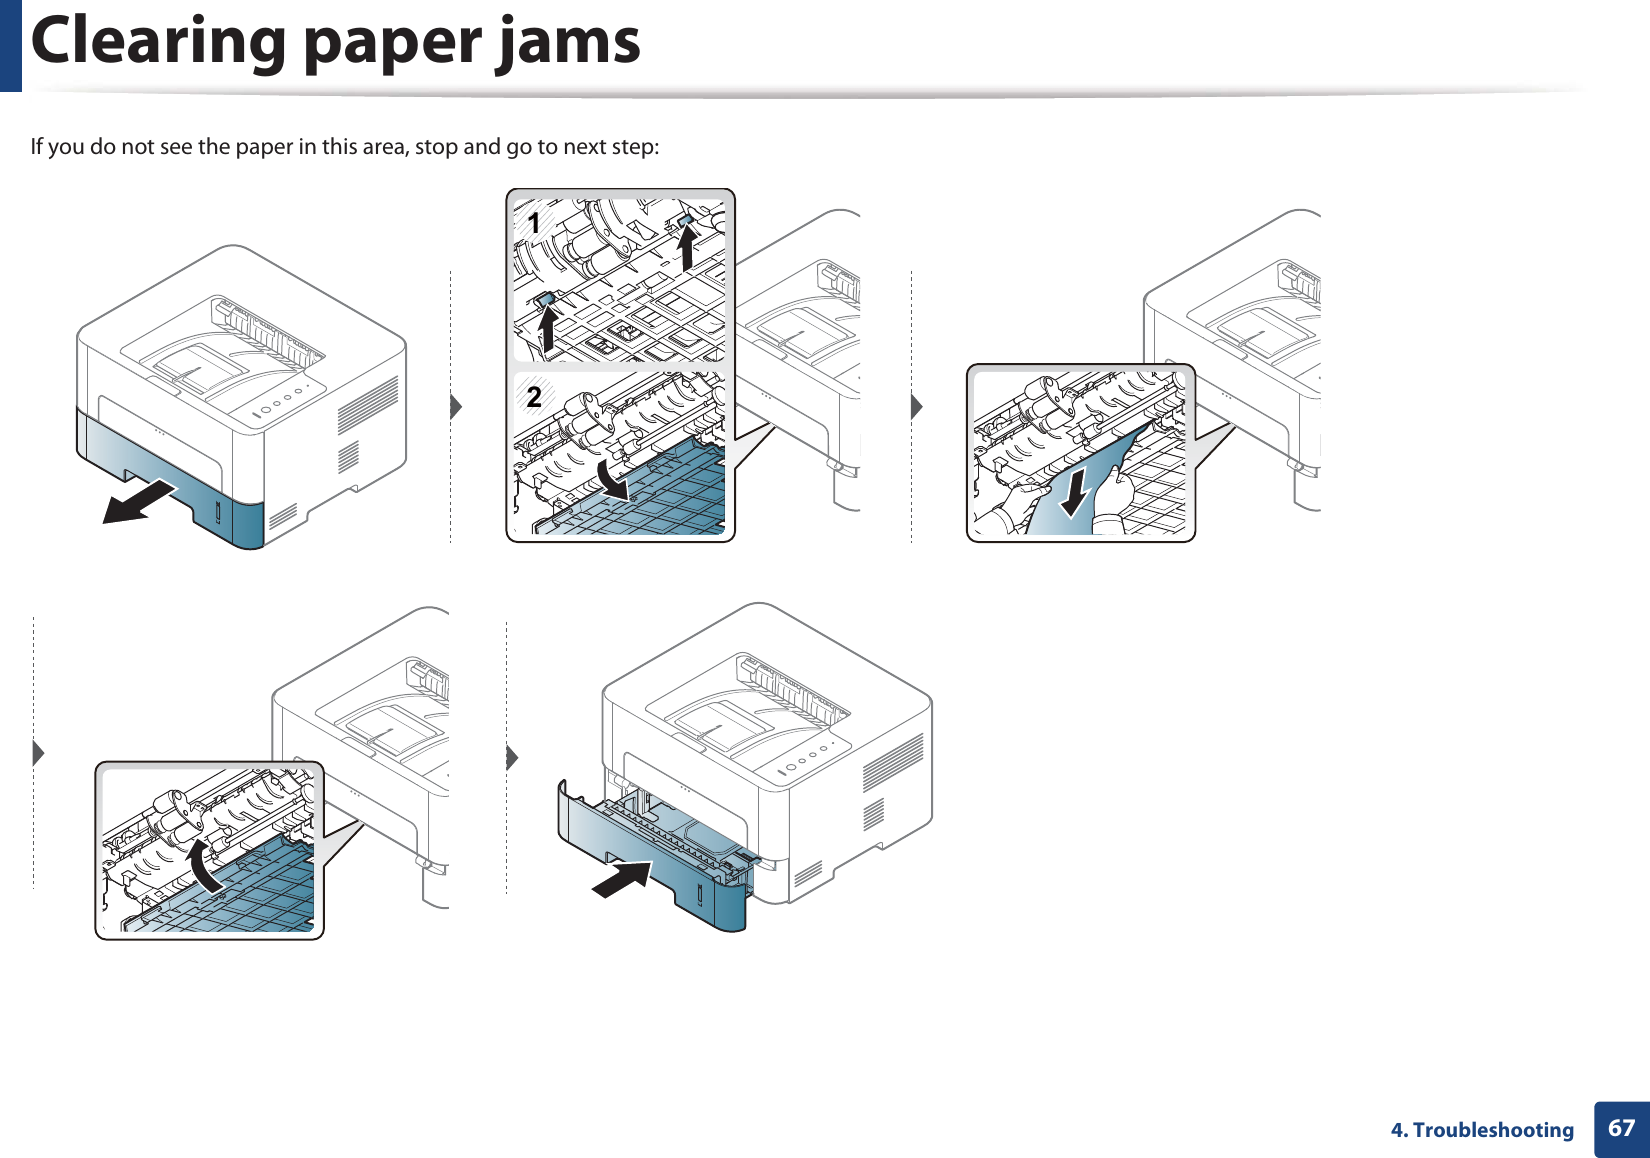 Clearing paper jams674. TroubleshootingIf you do not see the paper in this area, stop and go to next step:12